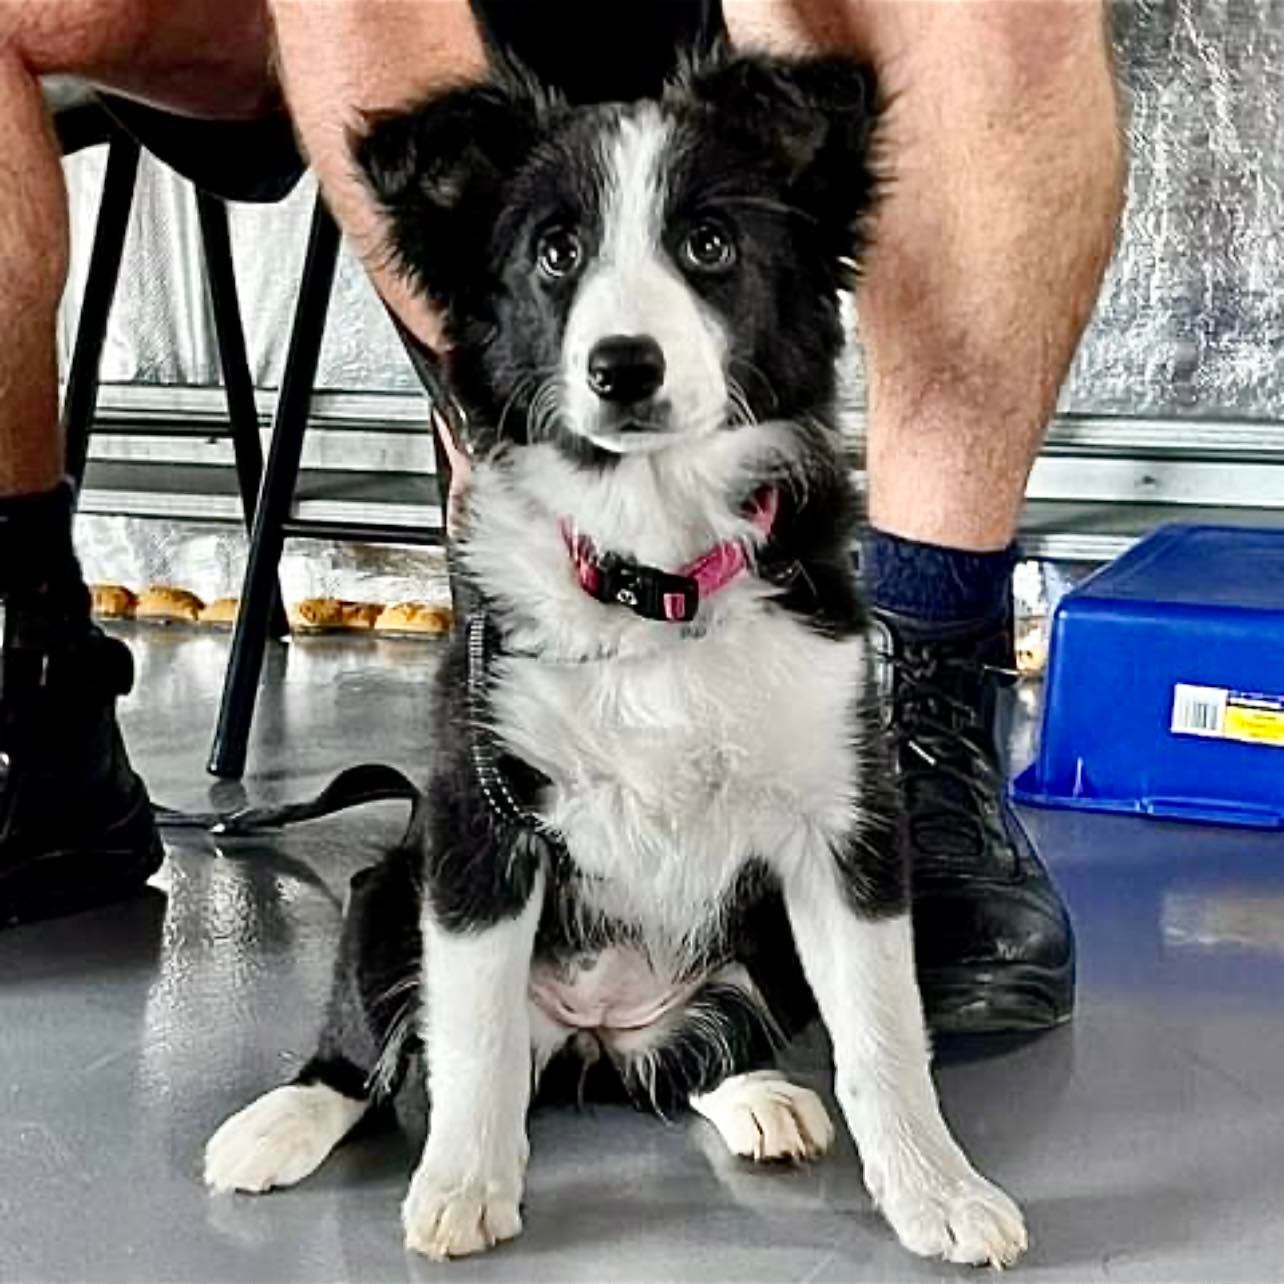 Marli, a border collie puppy, sitting in front of owner